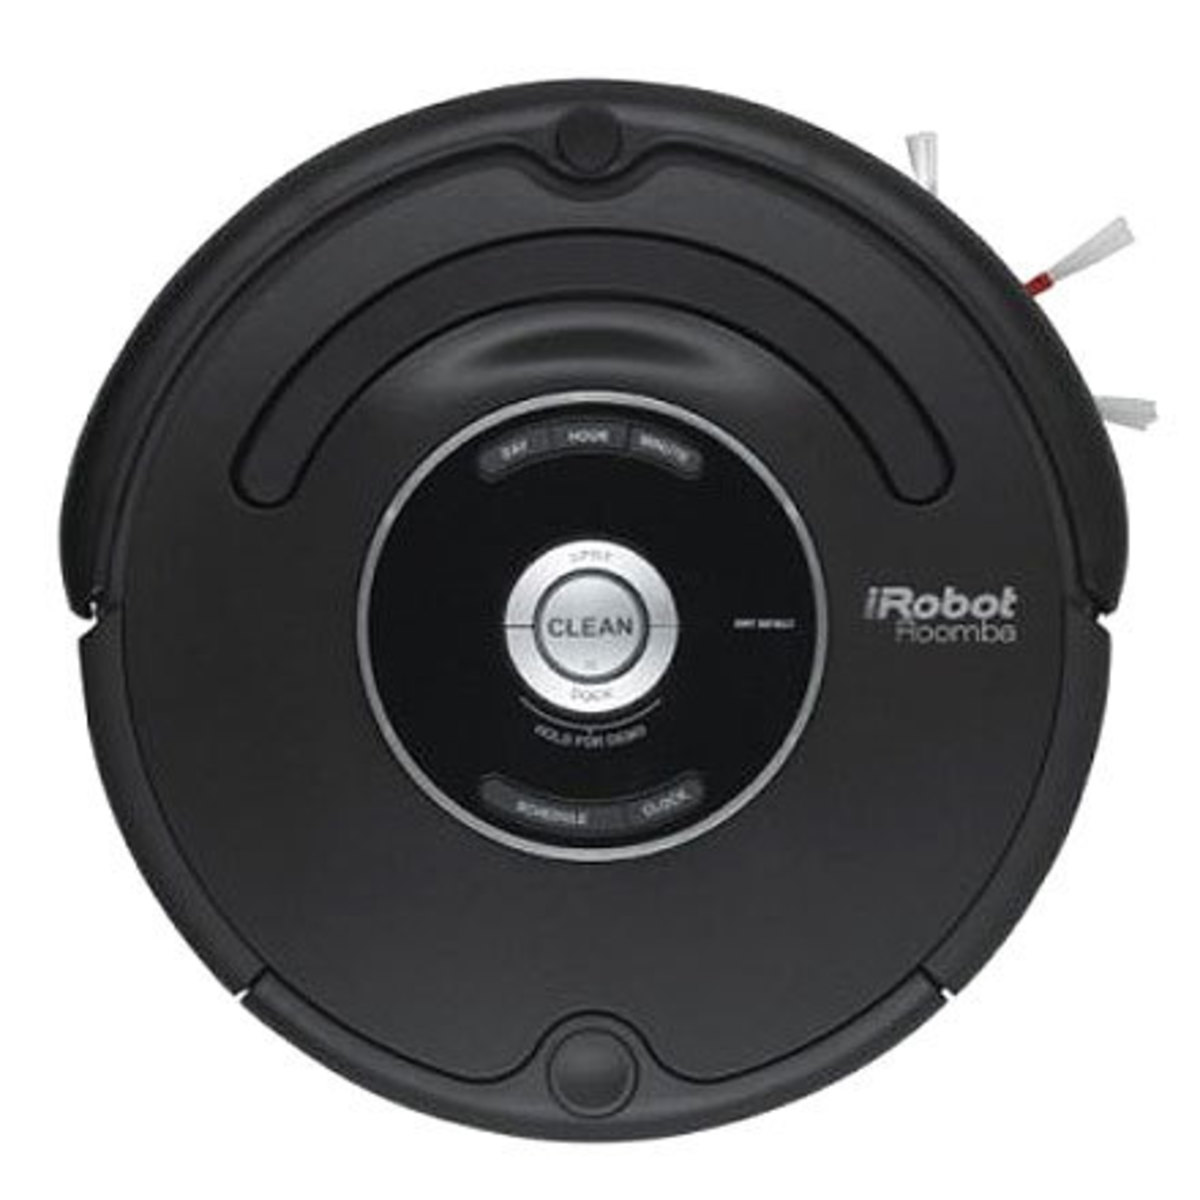 iRobot's vacuuming cleaner robots are one of the first household uses of robots that have gained wide acceptance.  They are sold at many well-known retail stores.